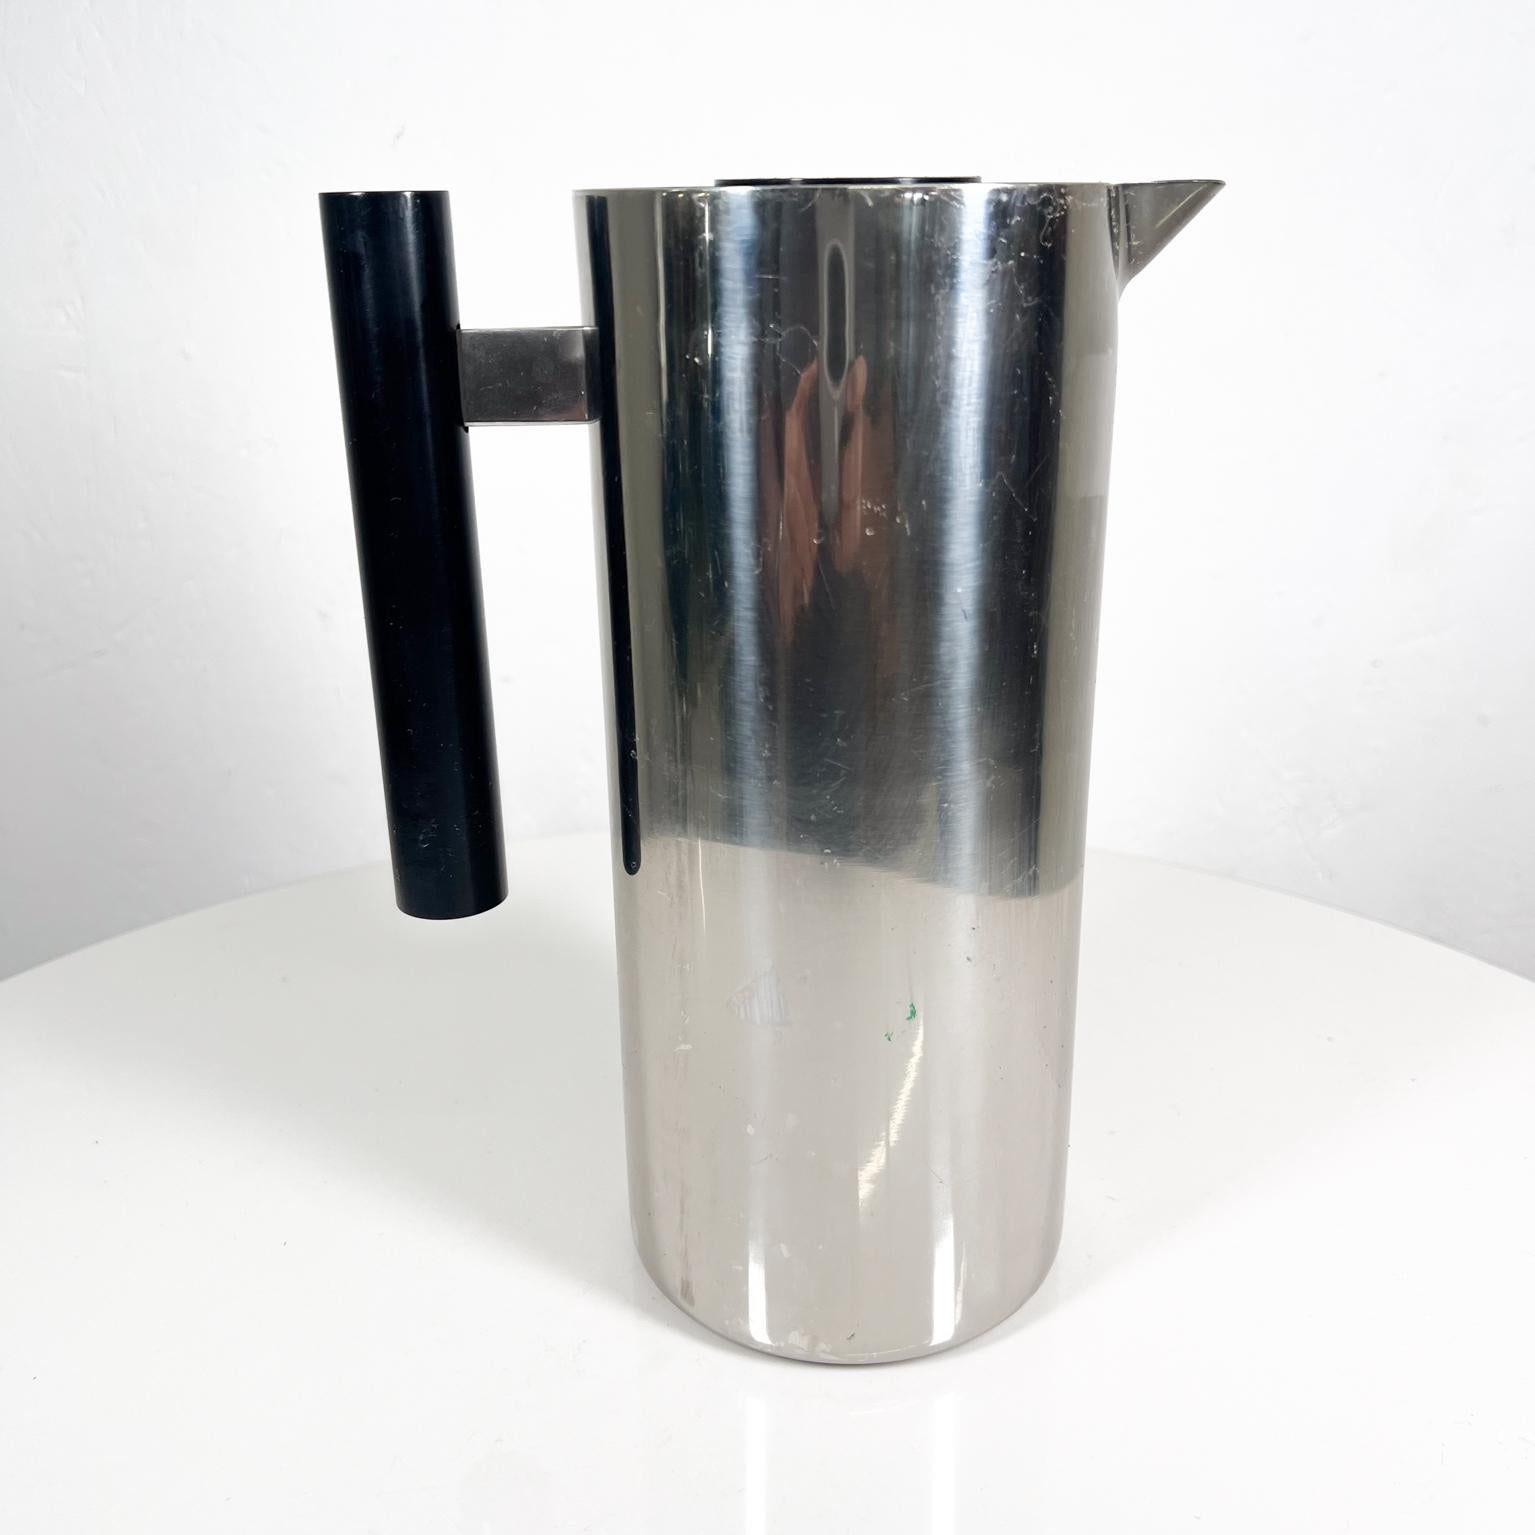 1950s Smith Metal Arts Stainless Modern Pitcher Carafe Buffalo NY
Vintage Insulated Coffee Pot Water Jug
7 d x 4.13 w x 9.5 h
Pre-owned vintage condition.
Refer to images.